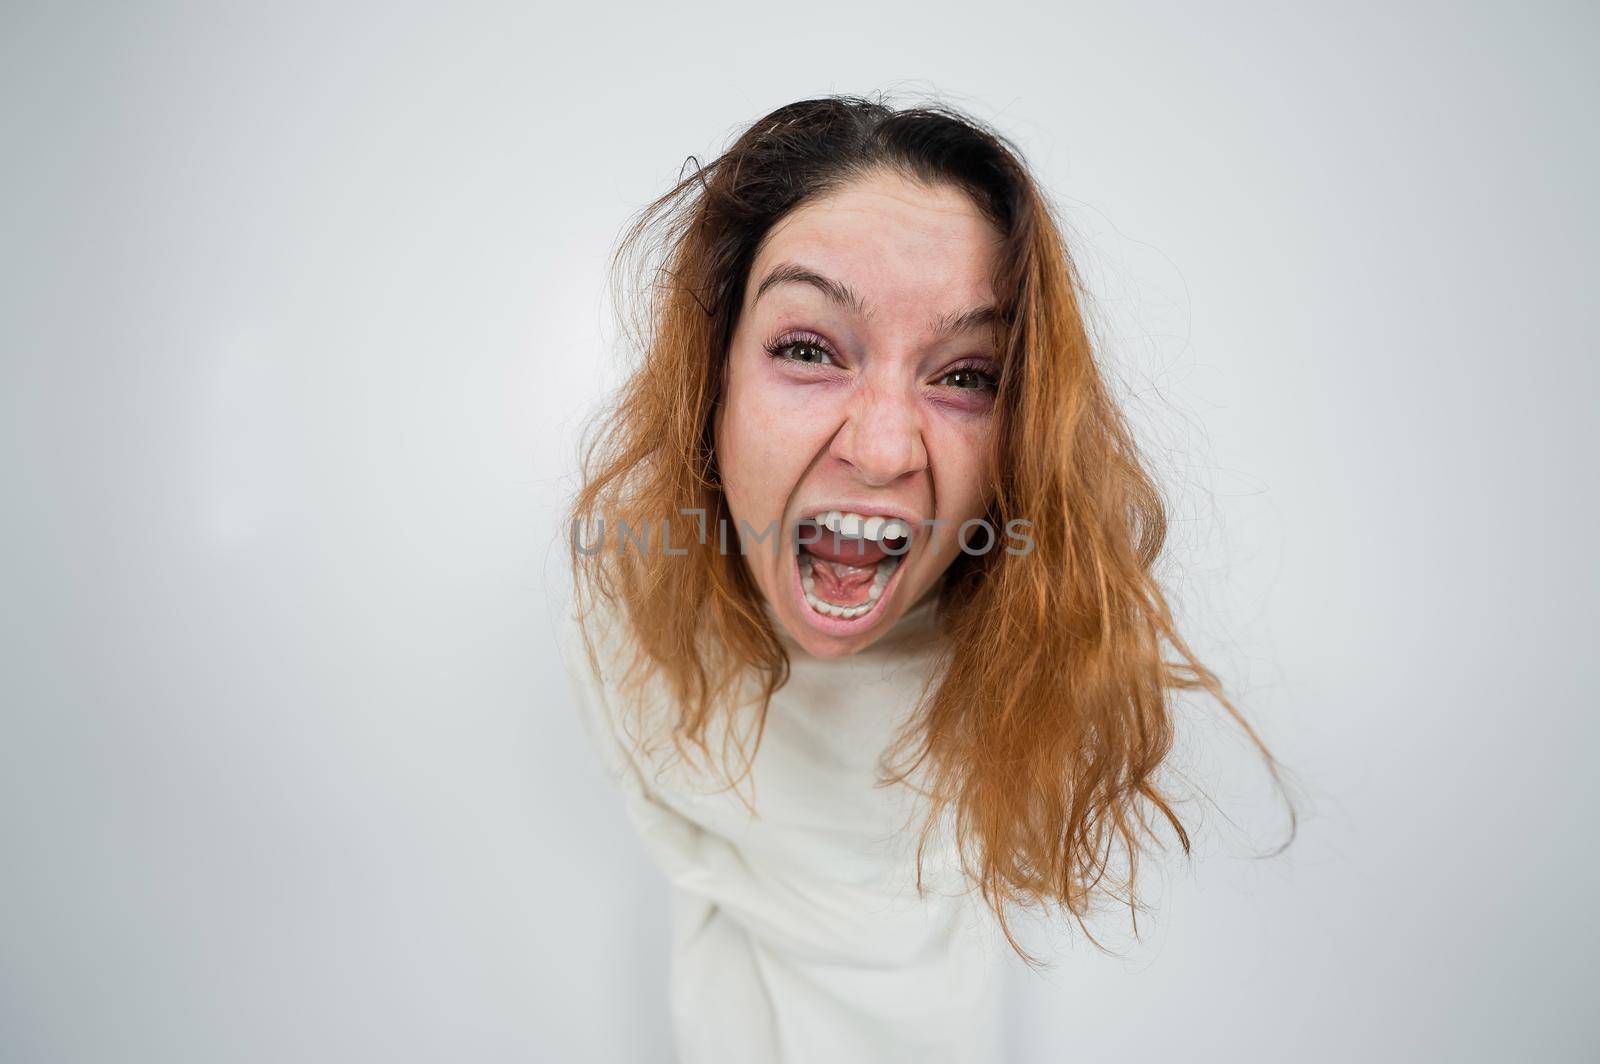 Close-up portrait of insane woman in straitjacket on white background